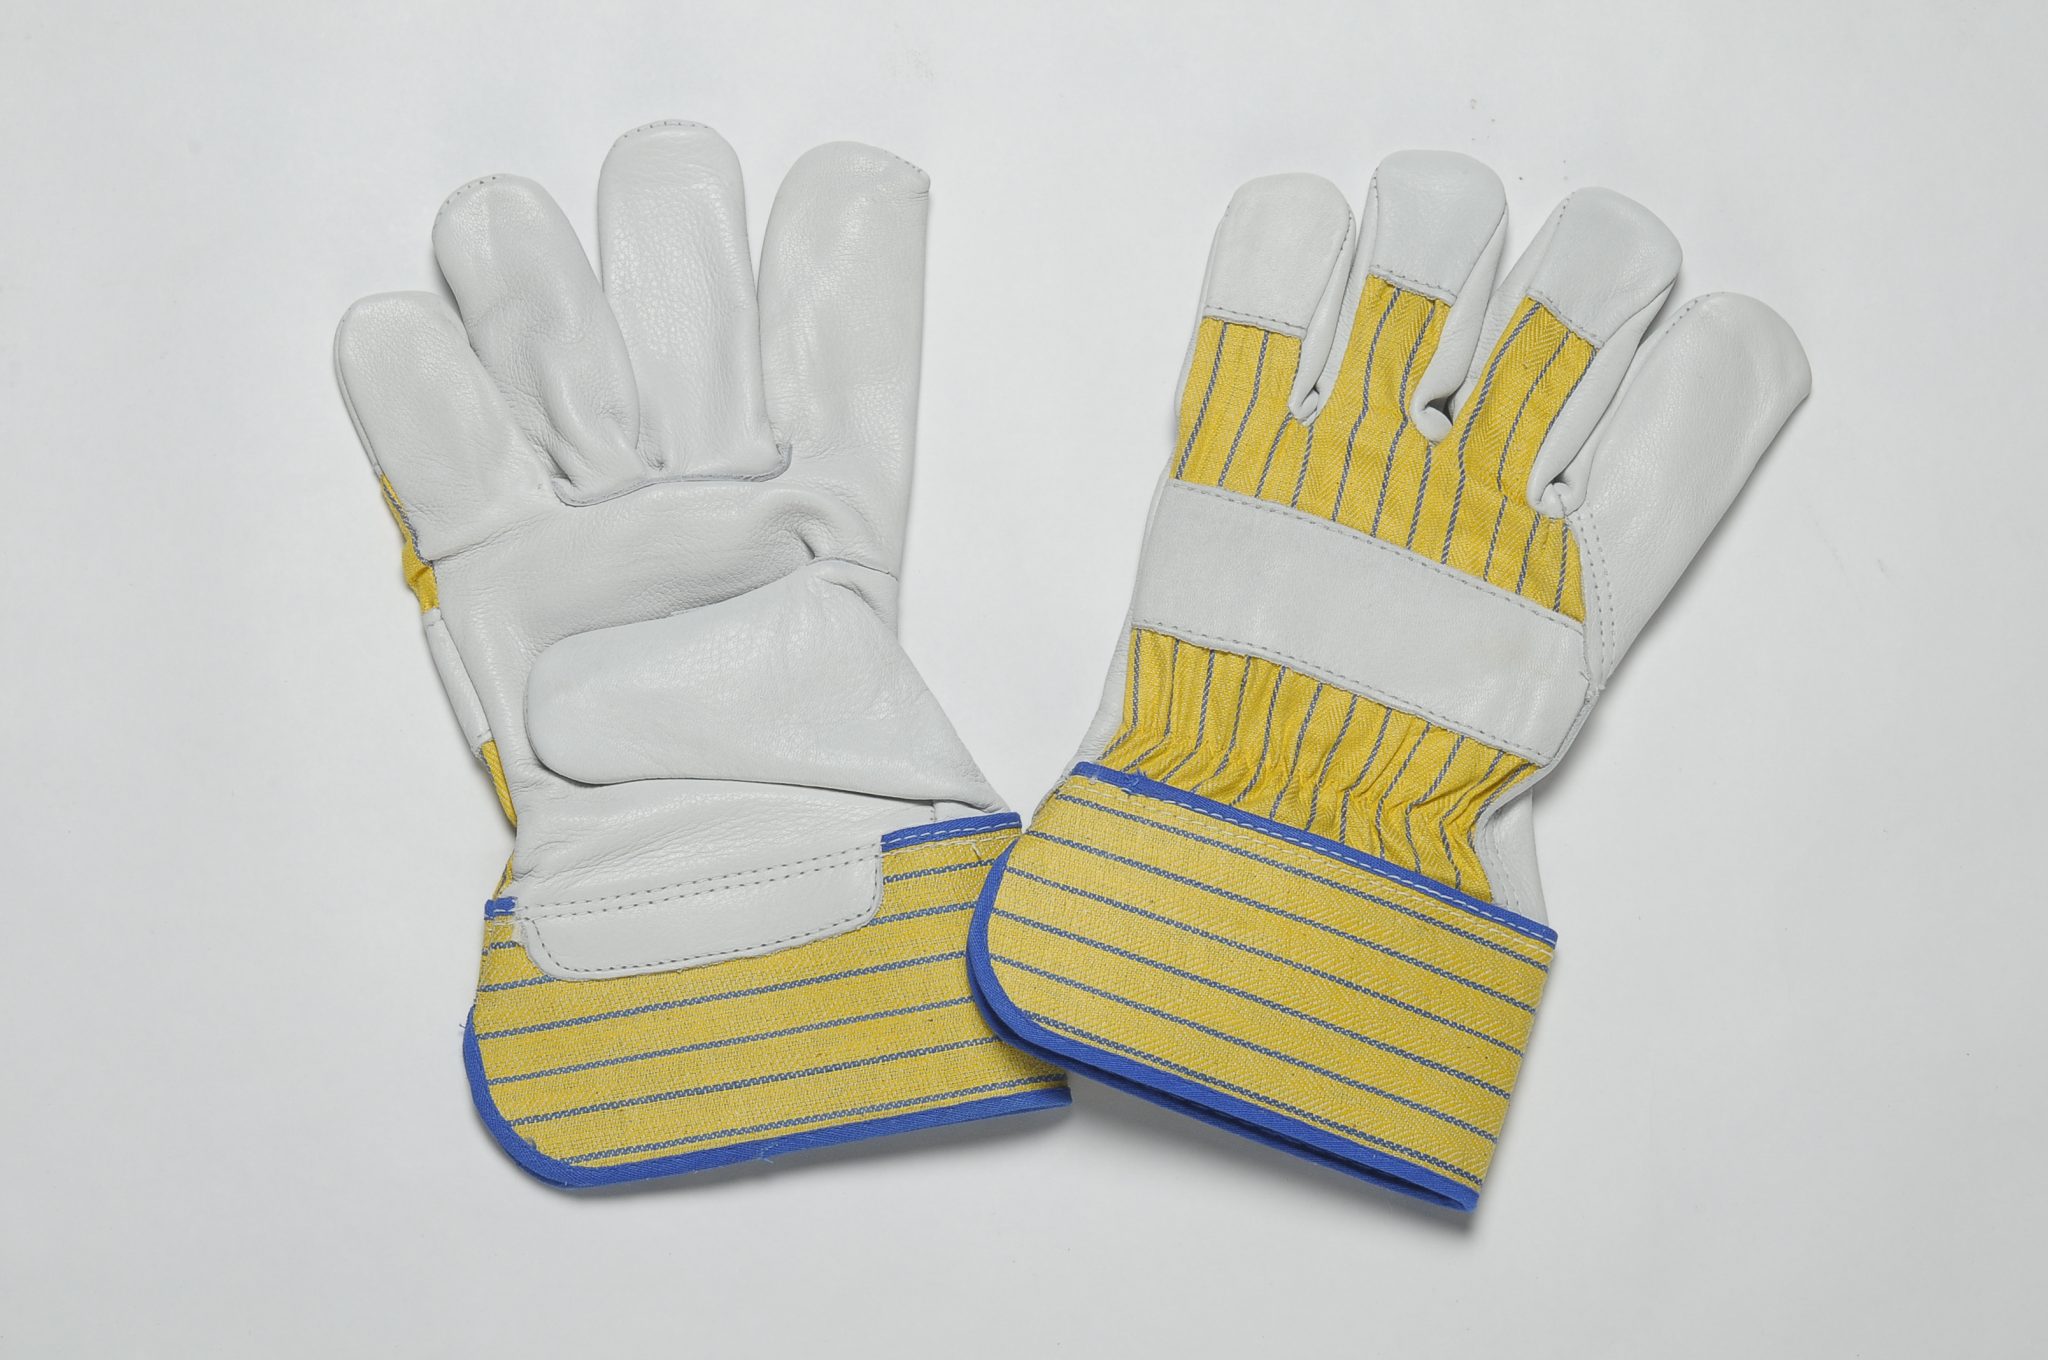 NATURAL GRAIN GLOVES, FLANNEL LINER IN PALM, YELLOW BLUE CUFF & BACK. ADJUSTIBLE ELASTIC IN THE WRIST